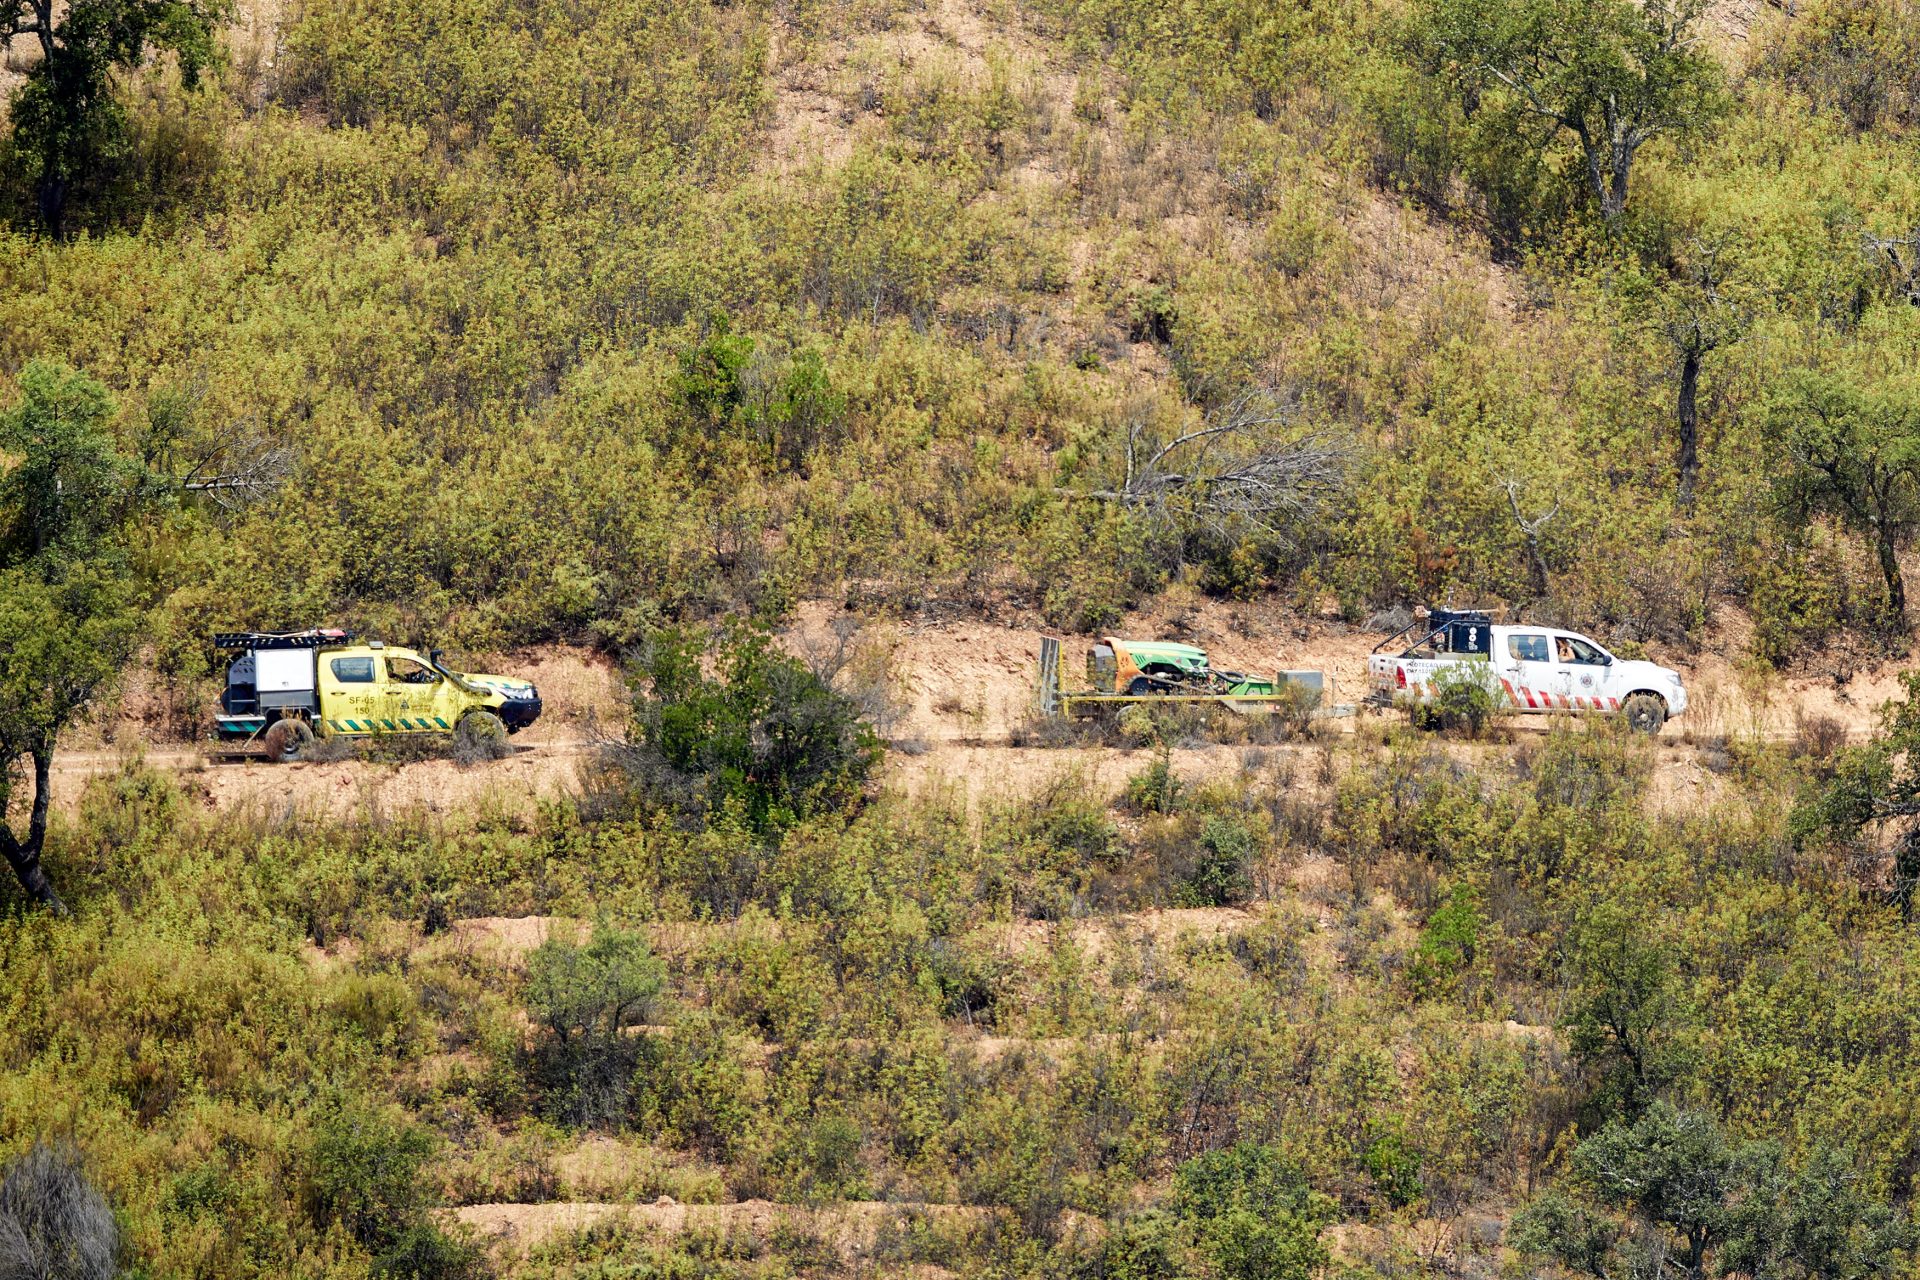 Images from the search for Madeleine McCann in the Algarve.